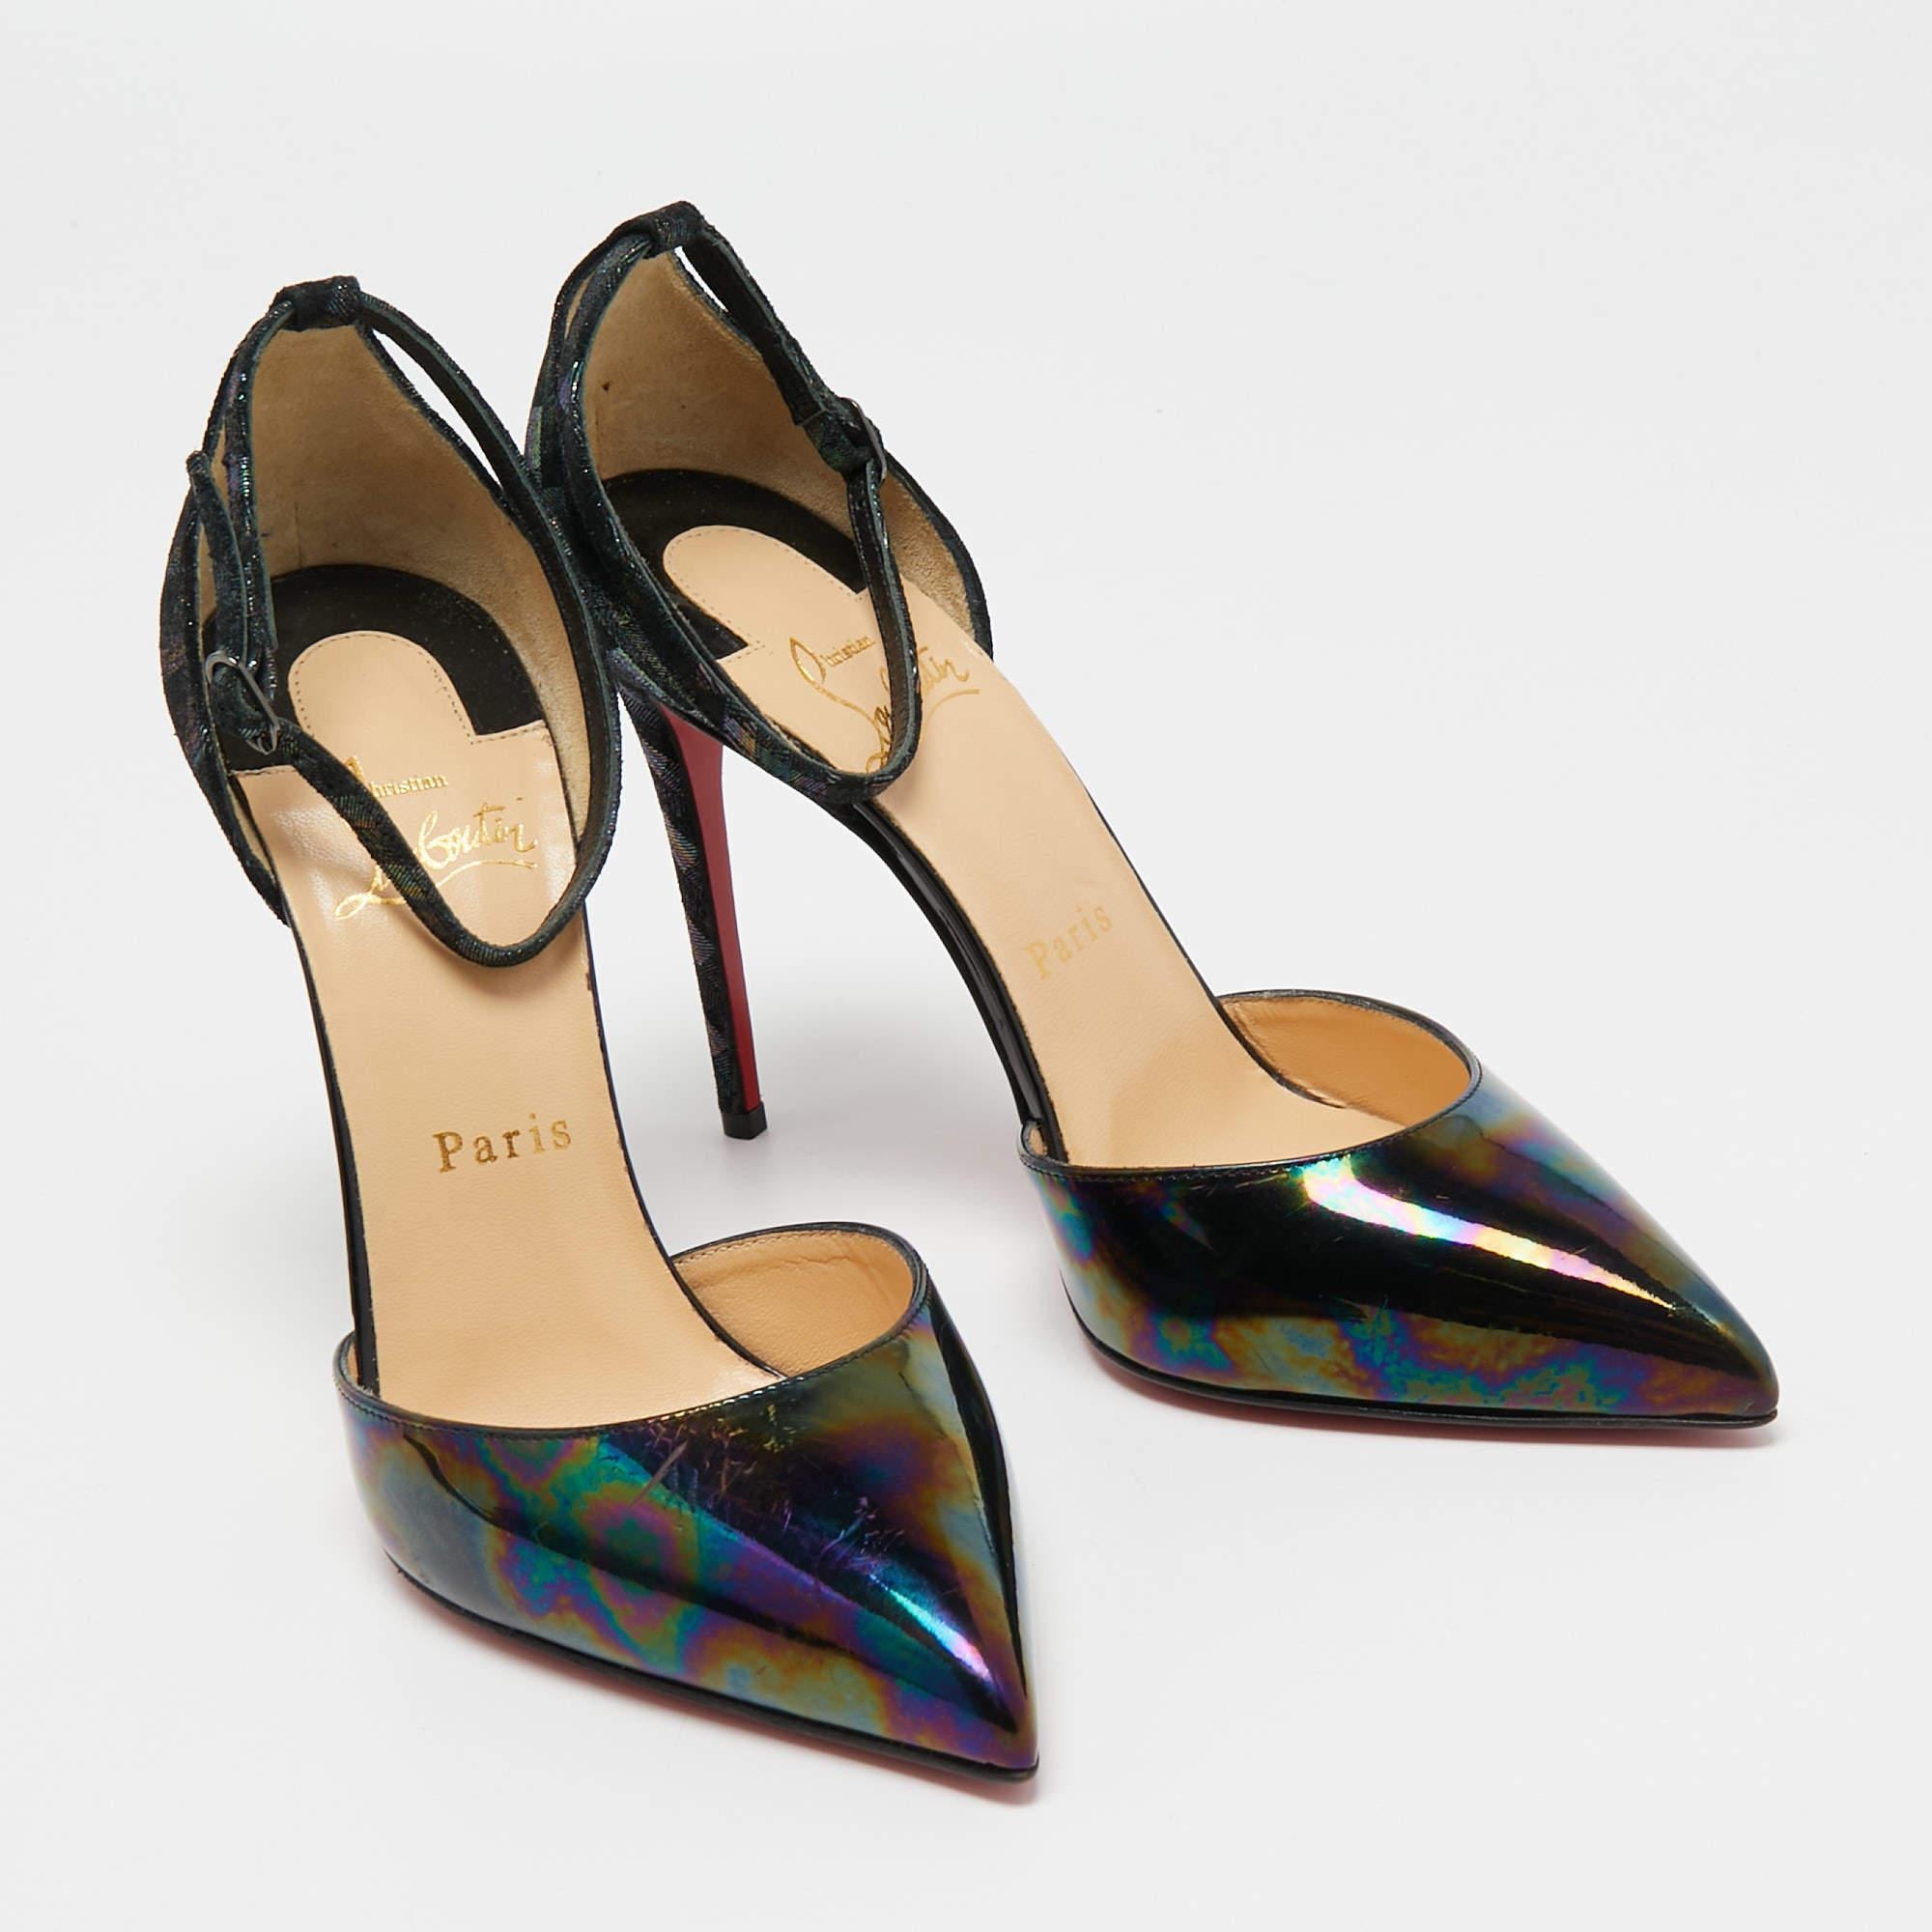 Christian Louboutin Black Iridescent Leather and Pumps Size 38.5 2